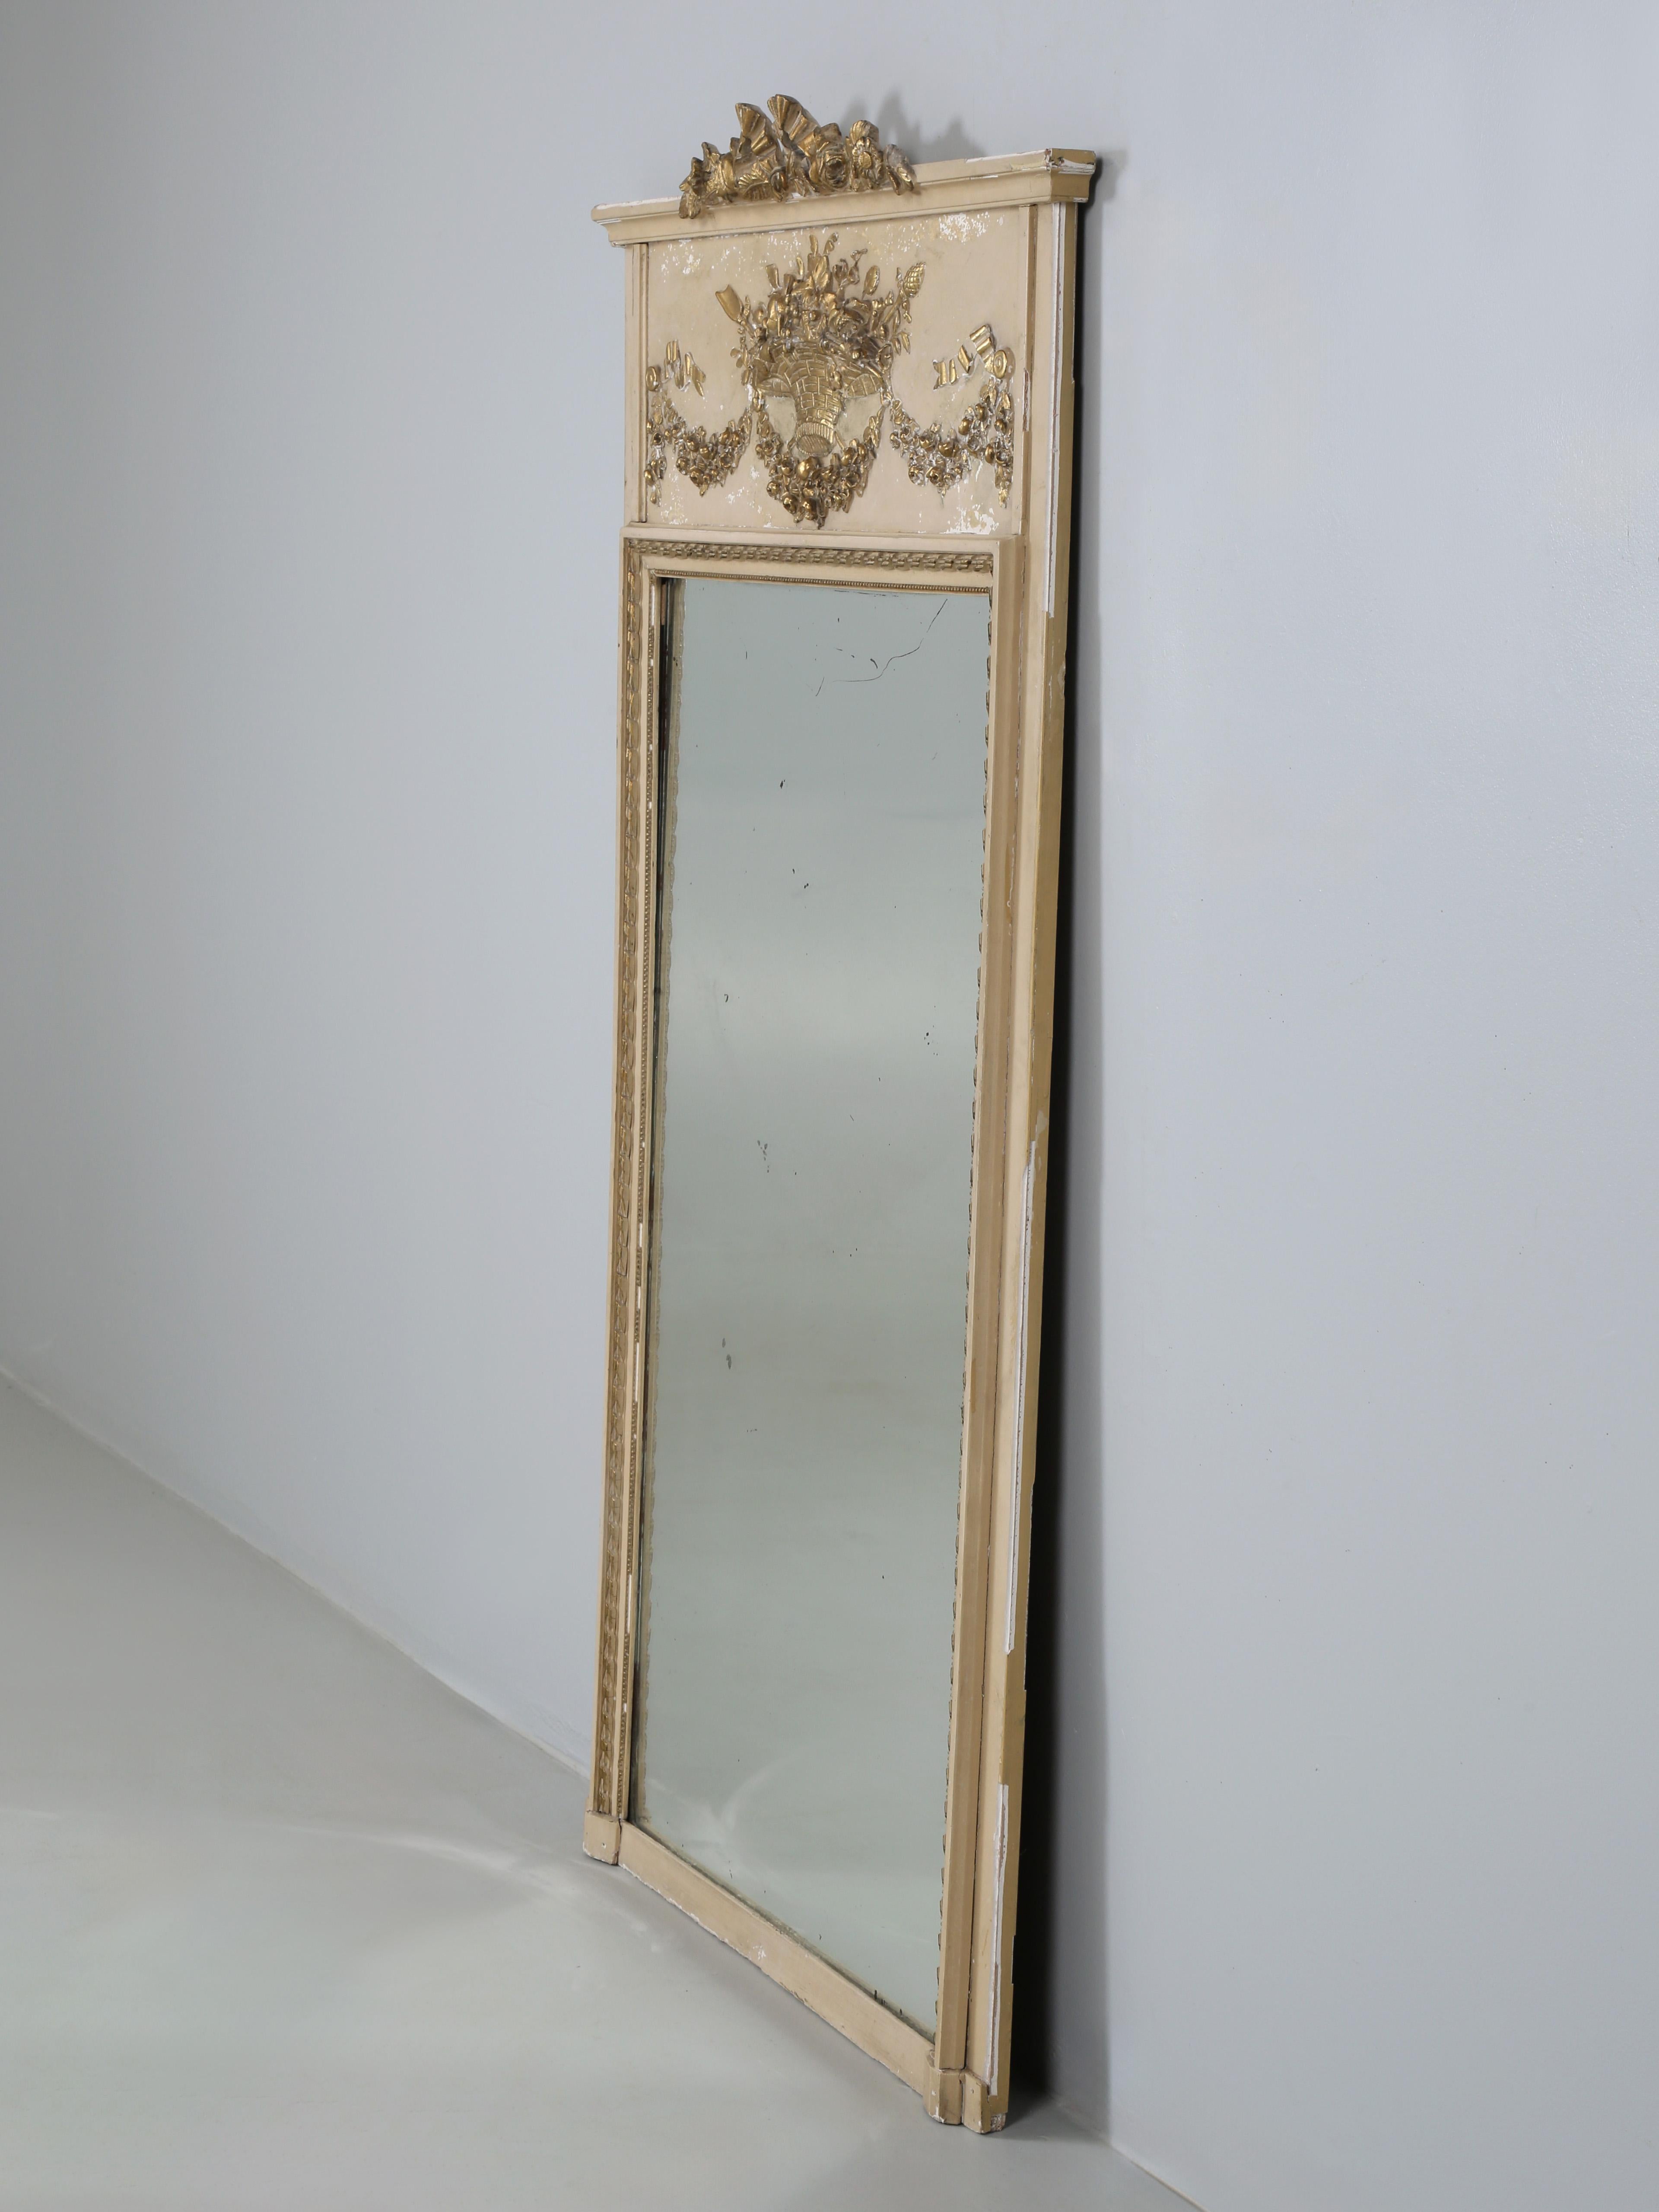 French Antique Trumeau Mirror still with its original beautiful aged glass. The entire Antique French Trumeau remains completely unrestored and shows it age gracefully. Our Old Plank finishing department can restore the Antique French Trumeau upon